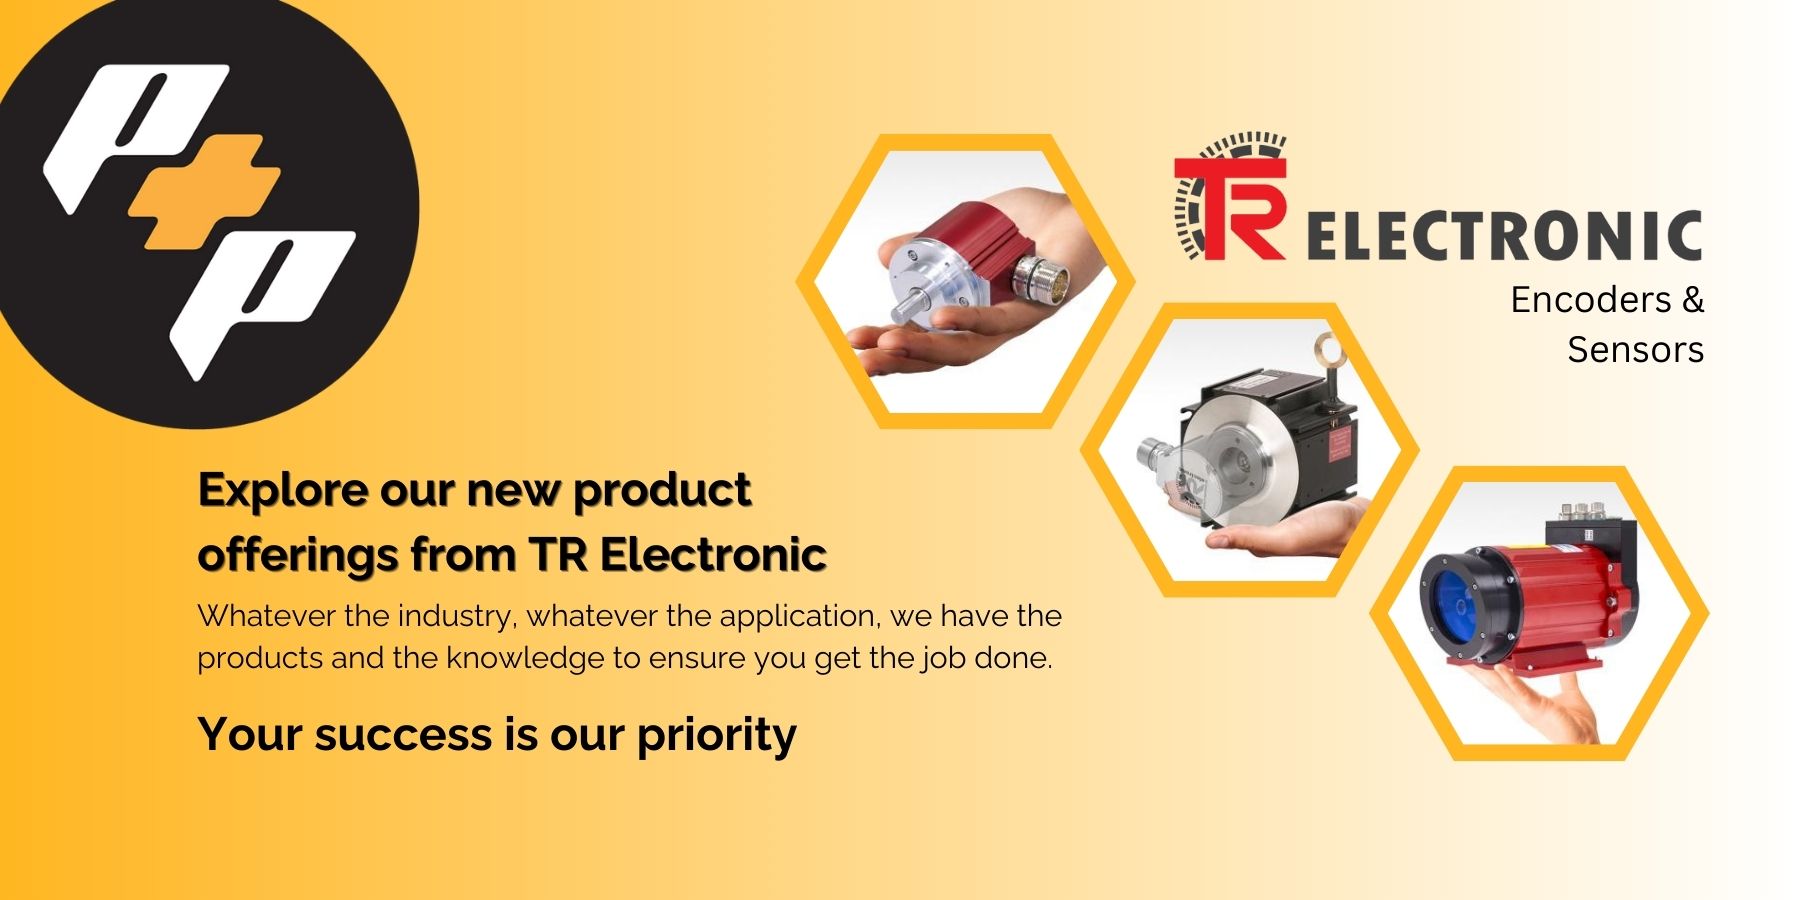 TR Electronic Encoders and Sensors